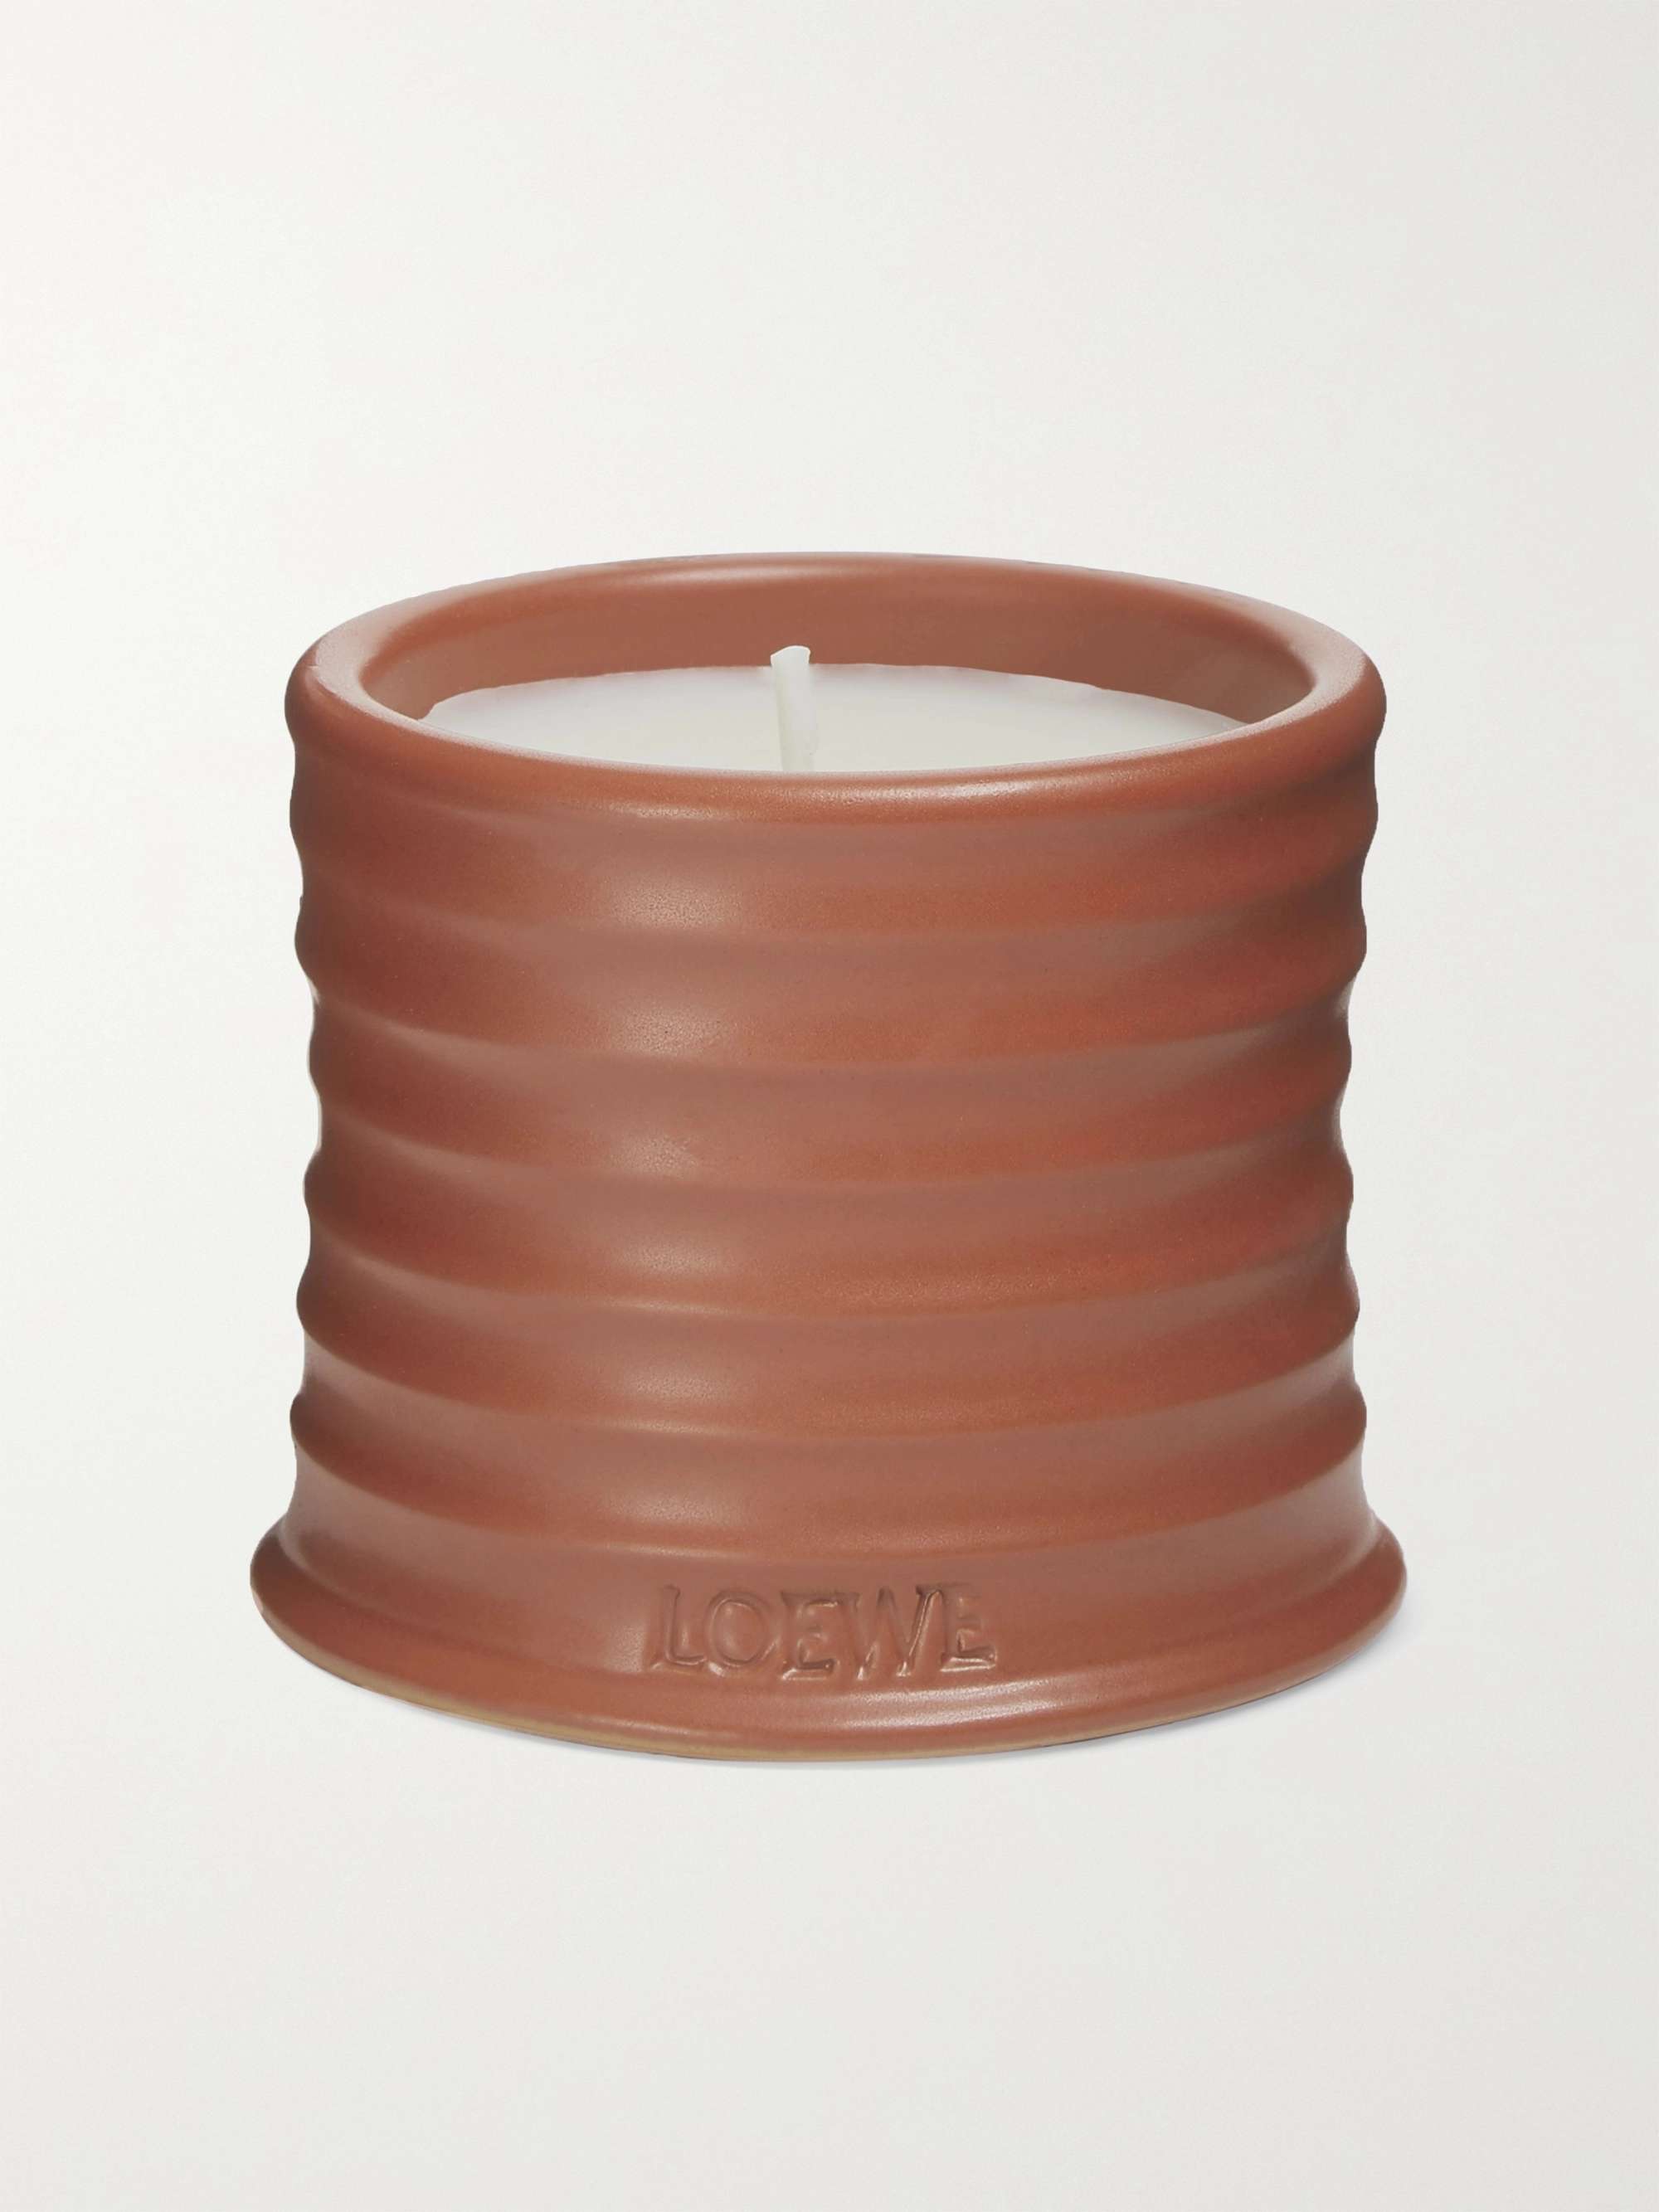 LOEWE HOME SCENTS Juniper Berry Scented Candle, 170g